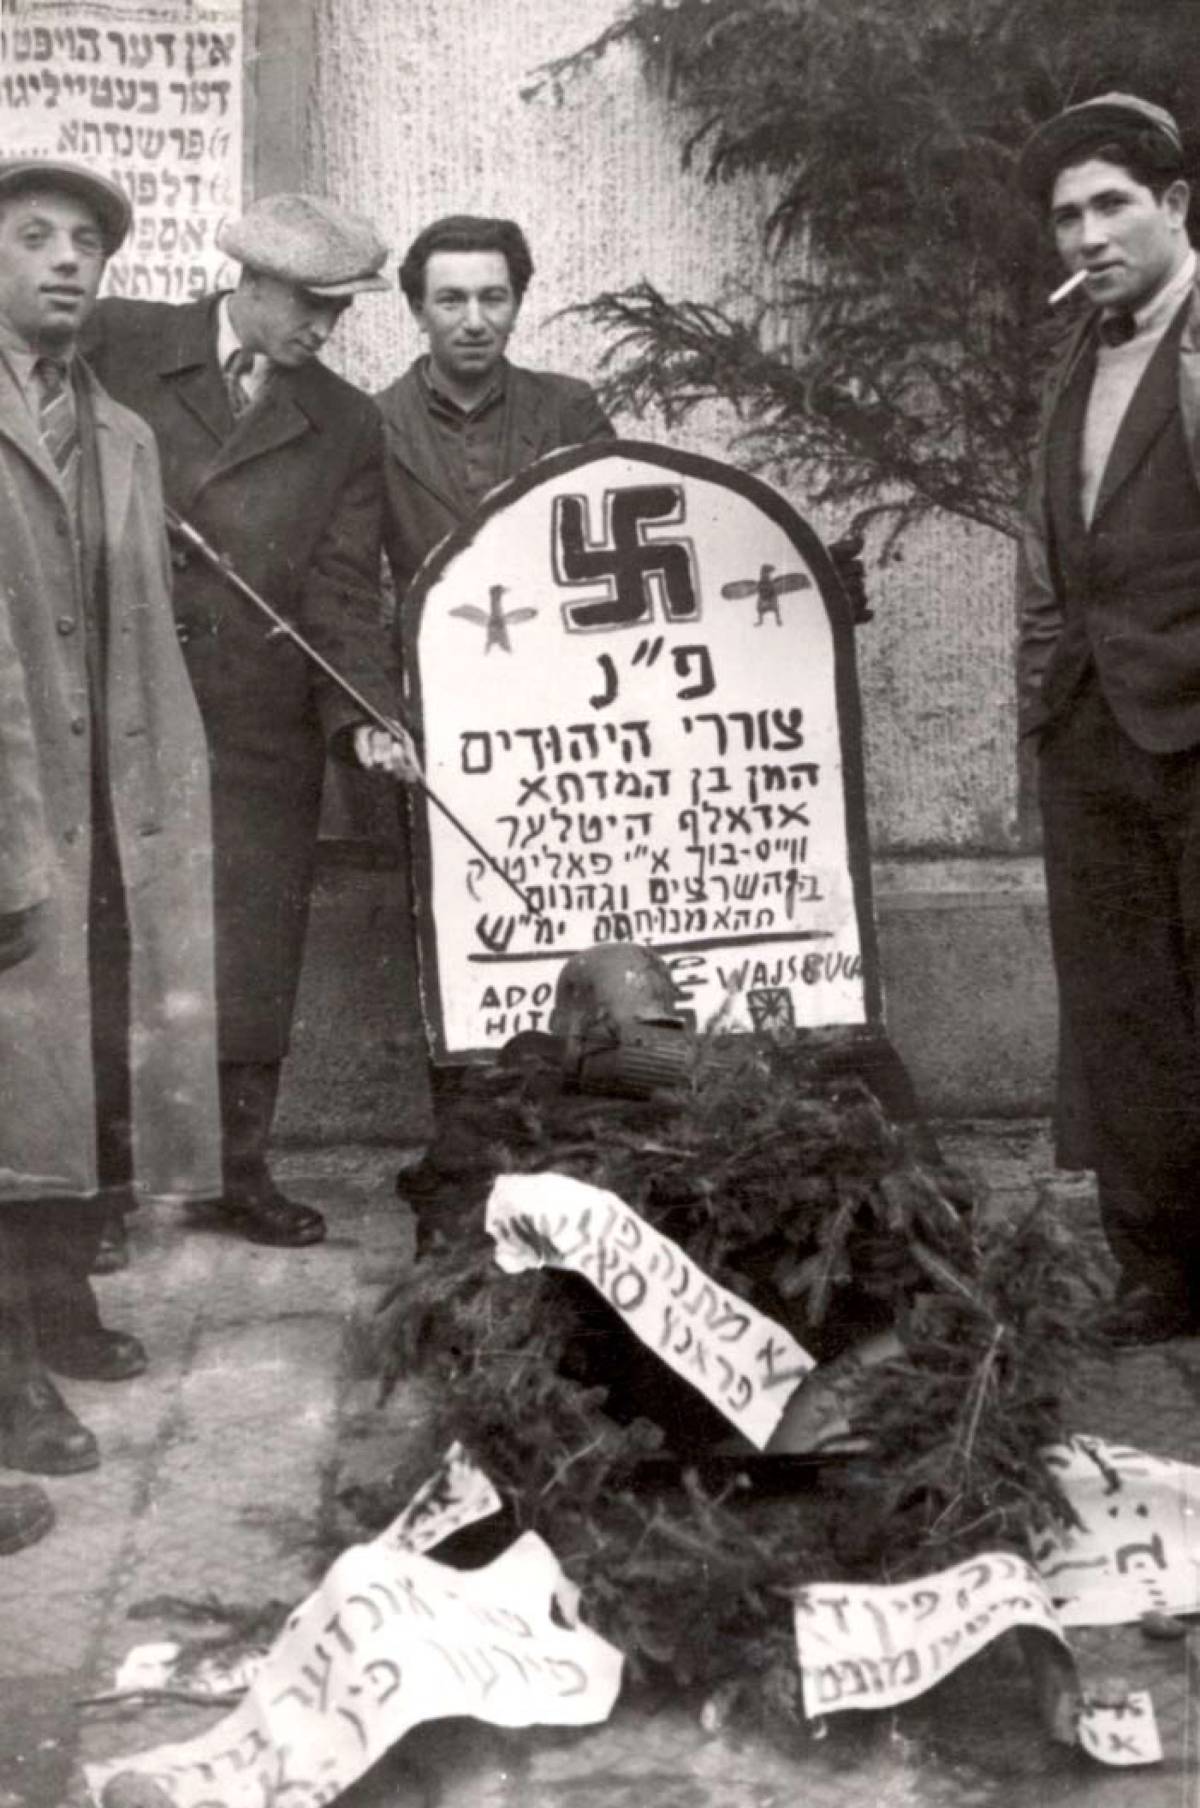 Celebrating Purim in the Landsberg DP camp. The tombstone reads, ‘Here is buried the oppressors of the Jews, Haman ben Hamdata, Adolf Hitler … among the insects and hell shall they find rest, may their names be erased.’